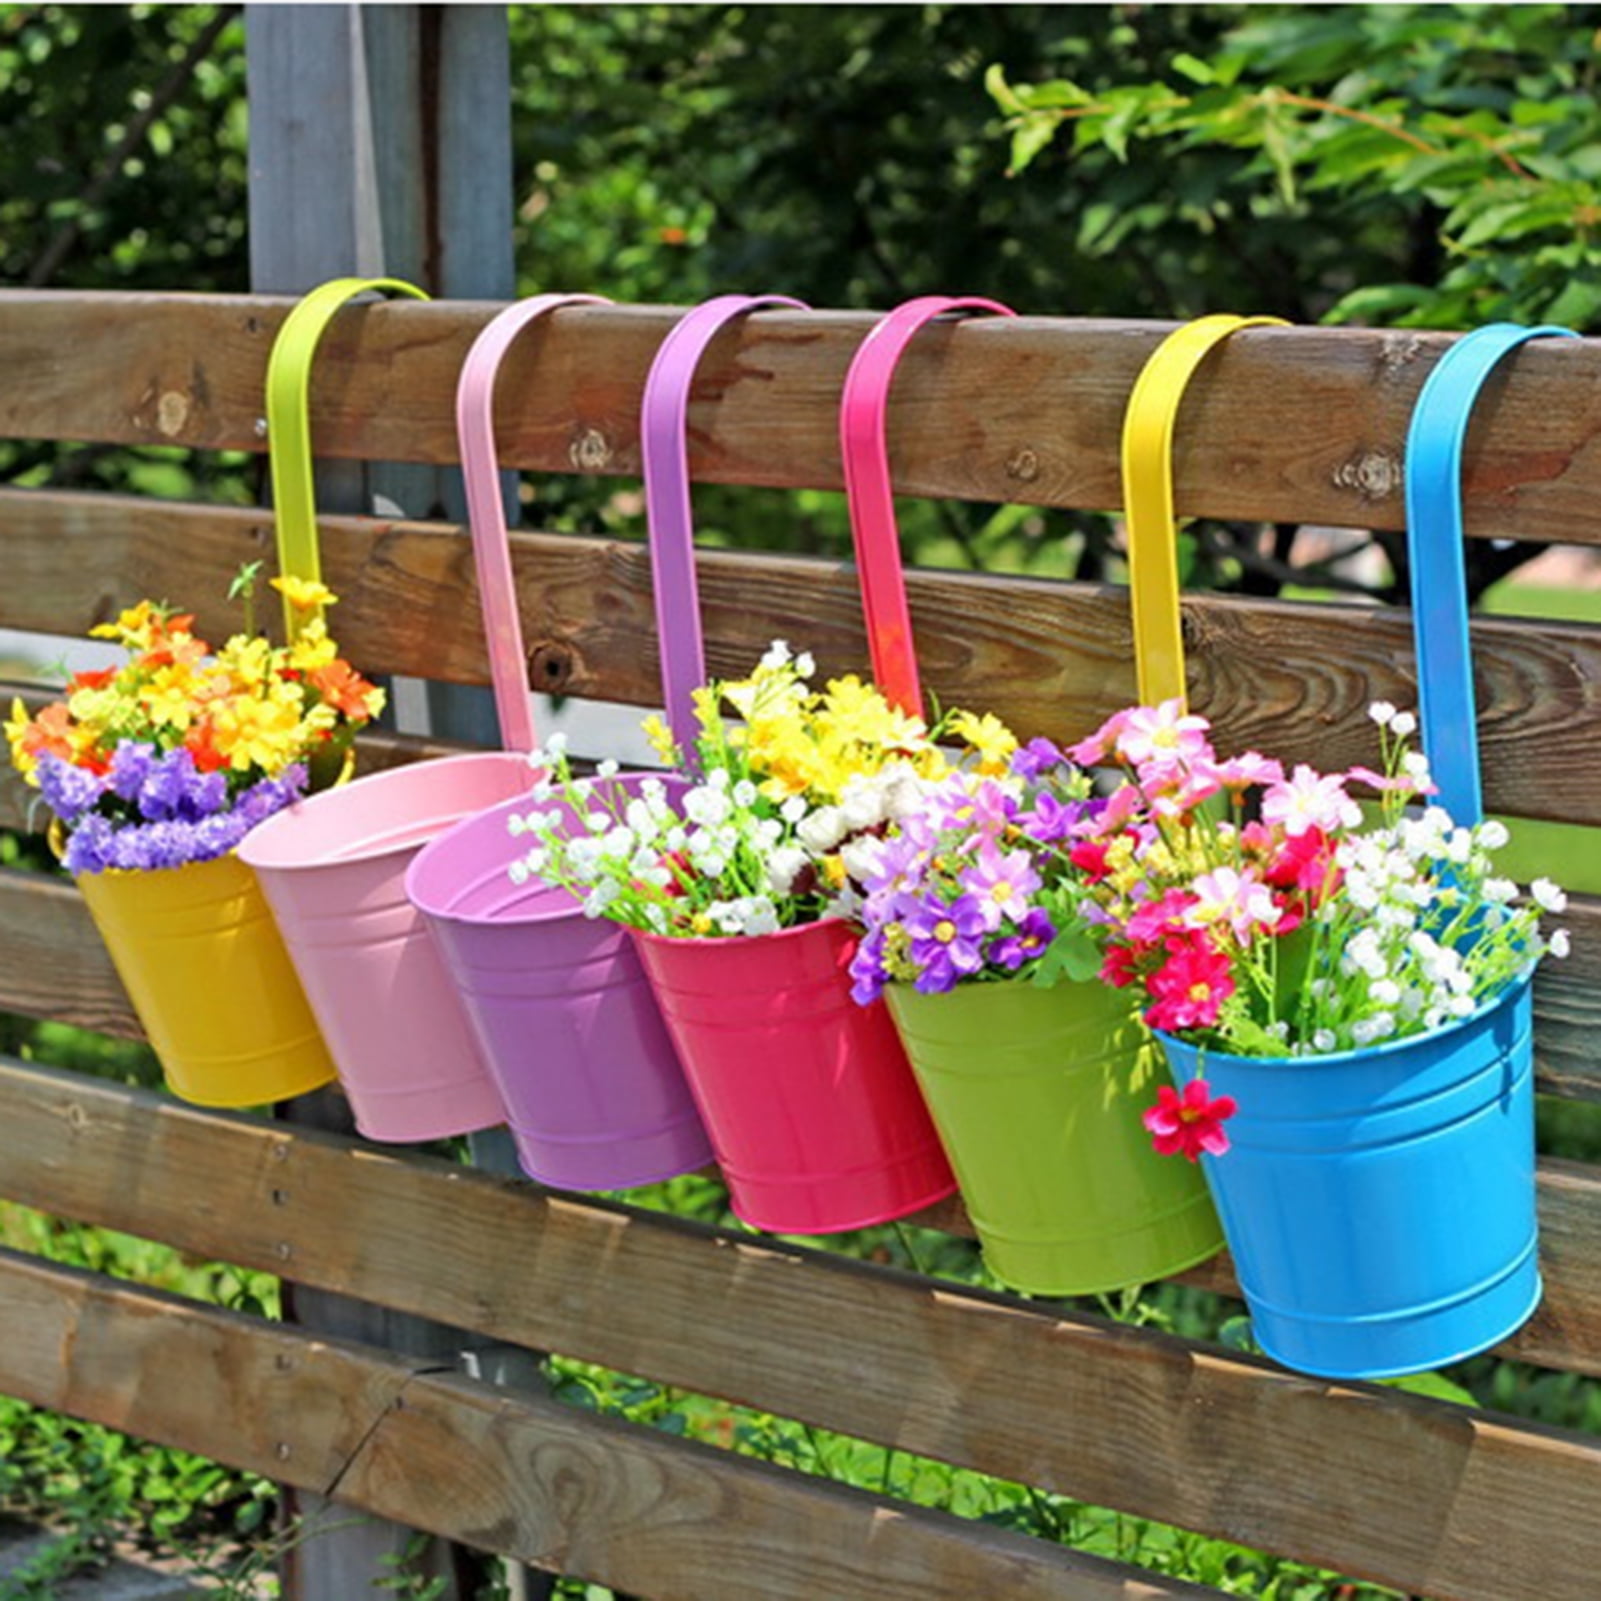 Details about   Self-watering Plant Flower Pot Wall Hanging Planter House Garden For Home Office 